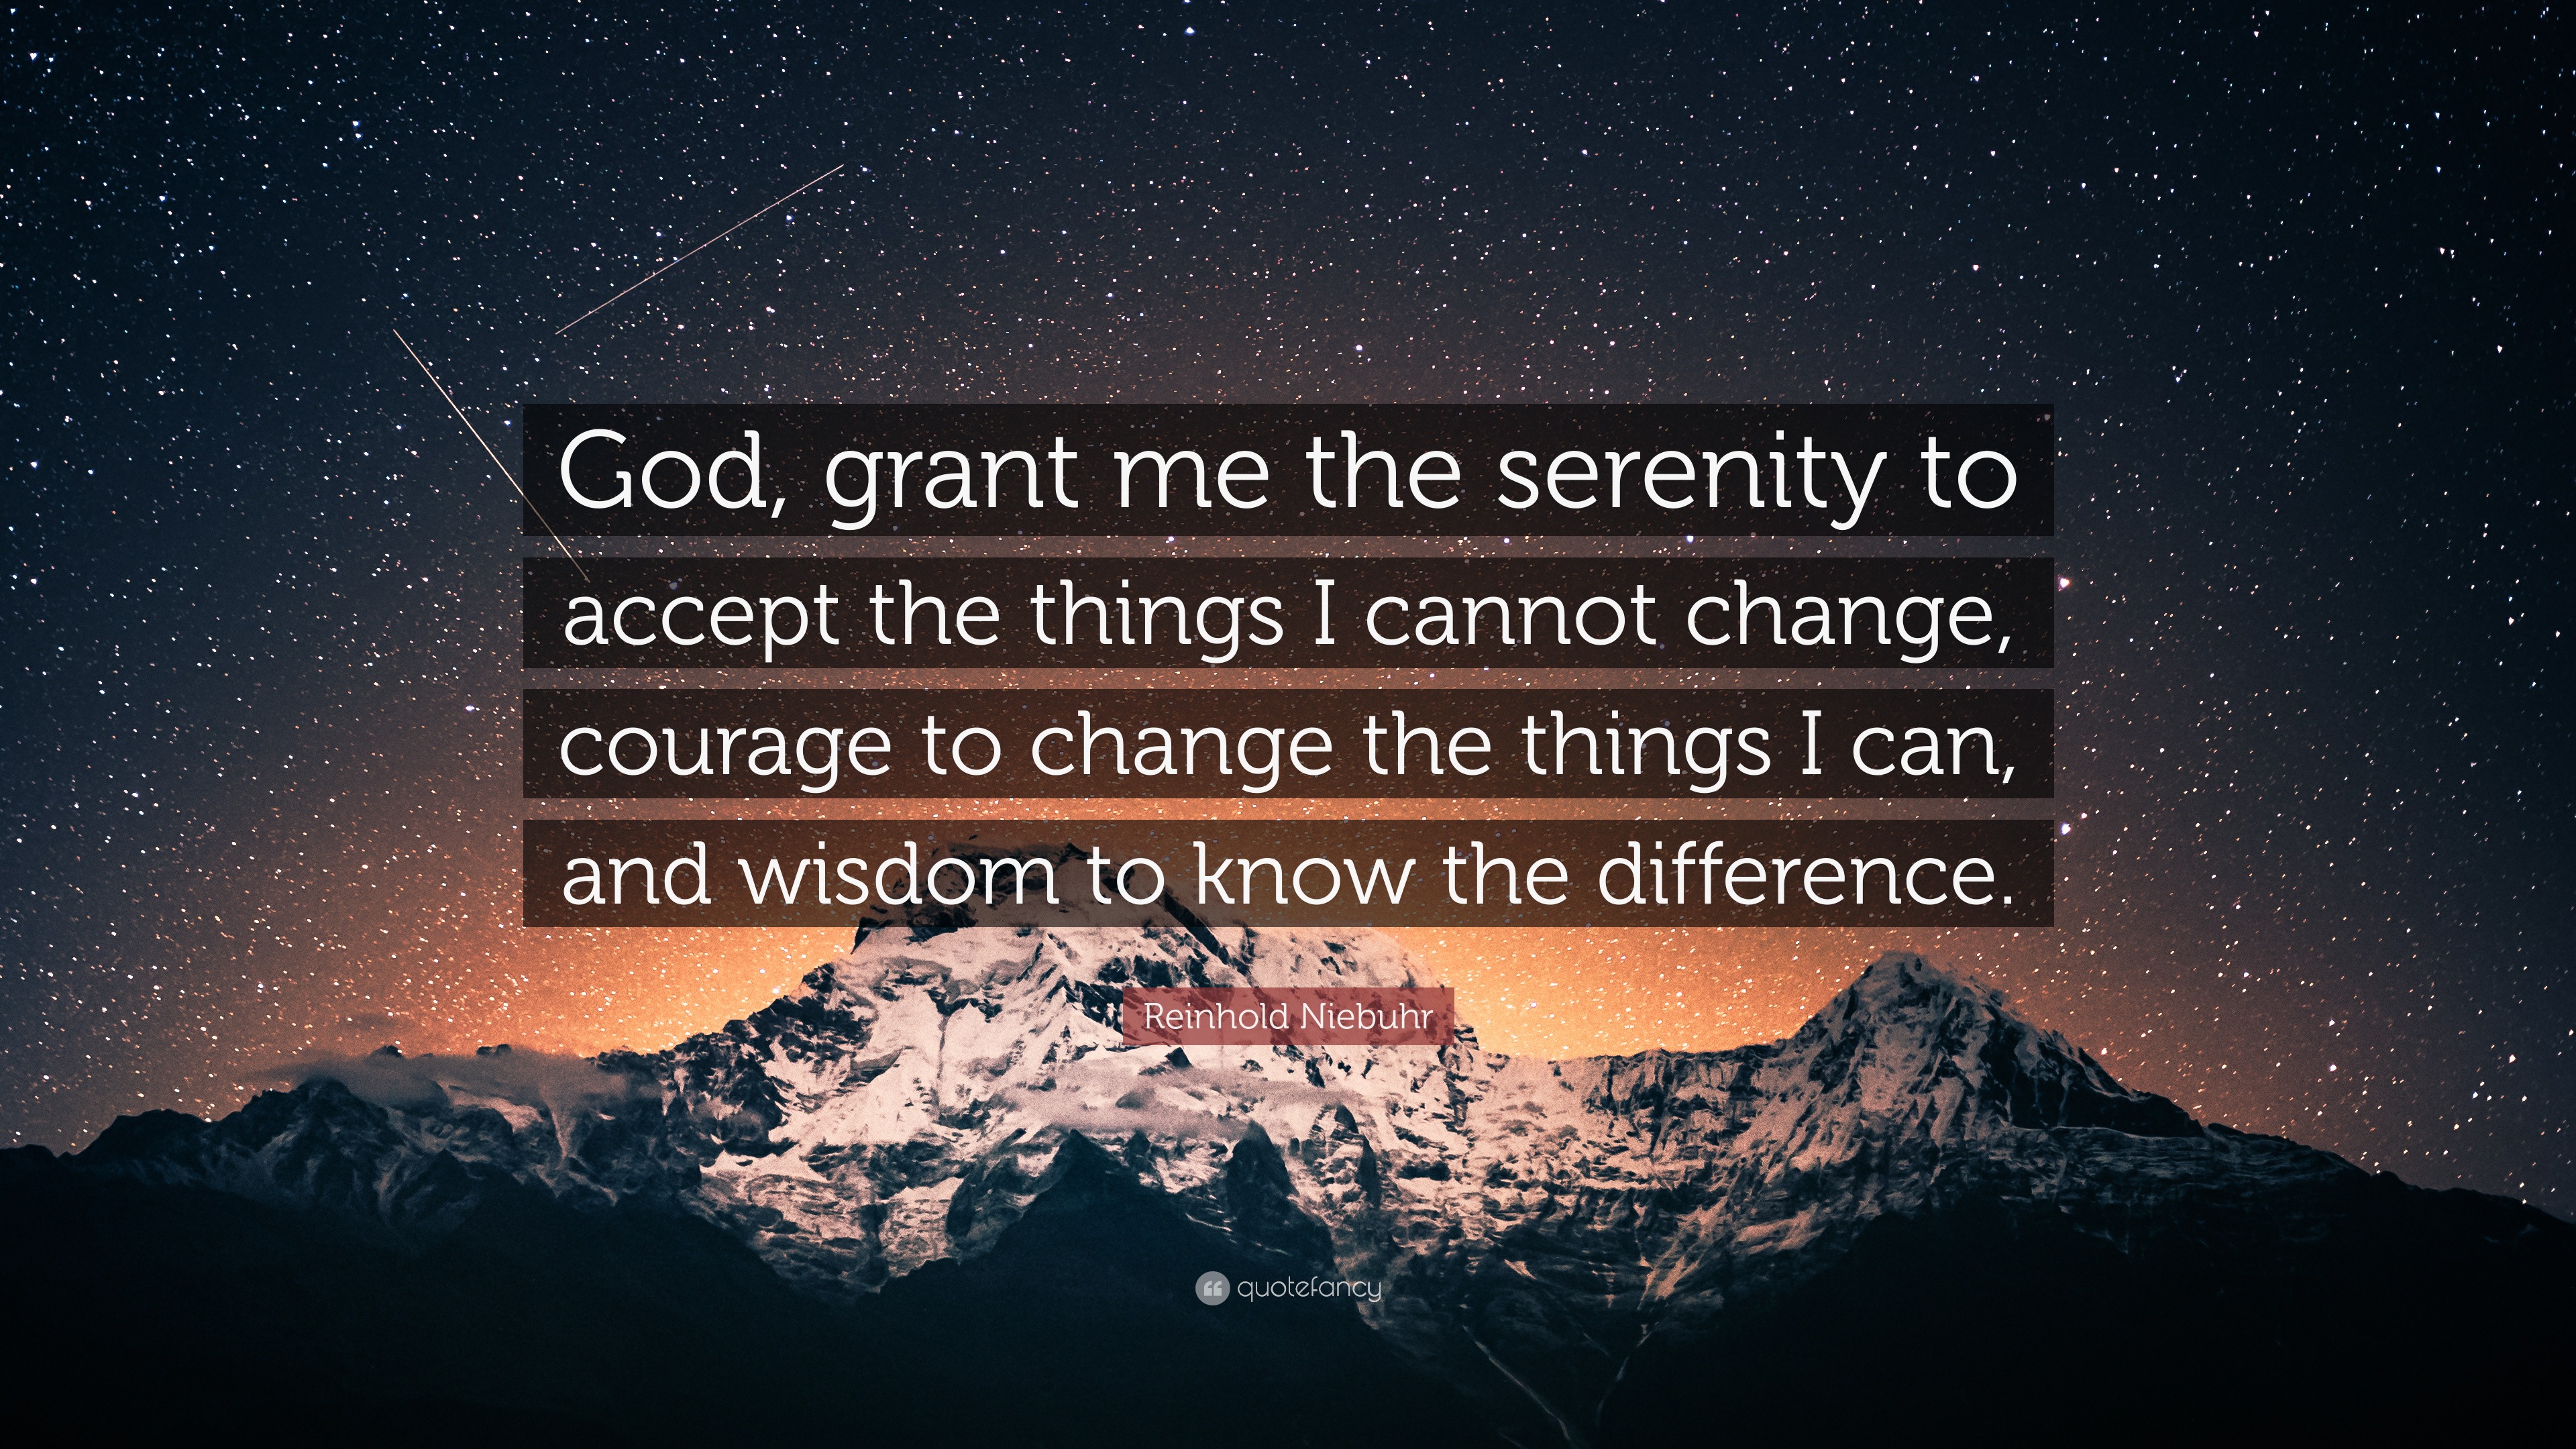 Reinhold Niebuhr Quote: “God, grant me the serenity to accept the things I  cannot change, courage to change the things I can, and wisdom to know ...”